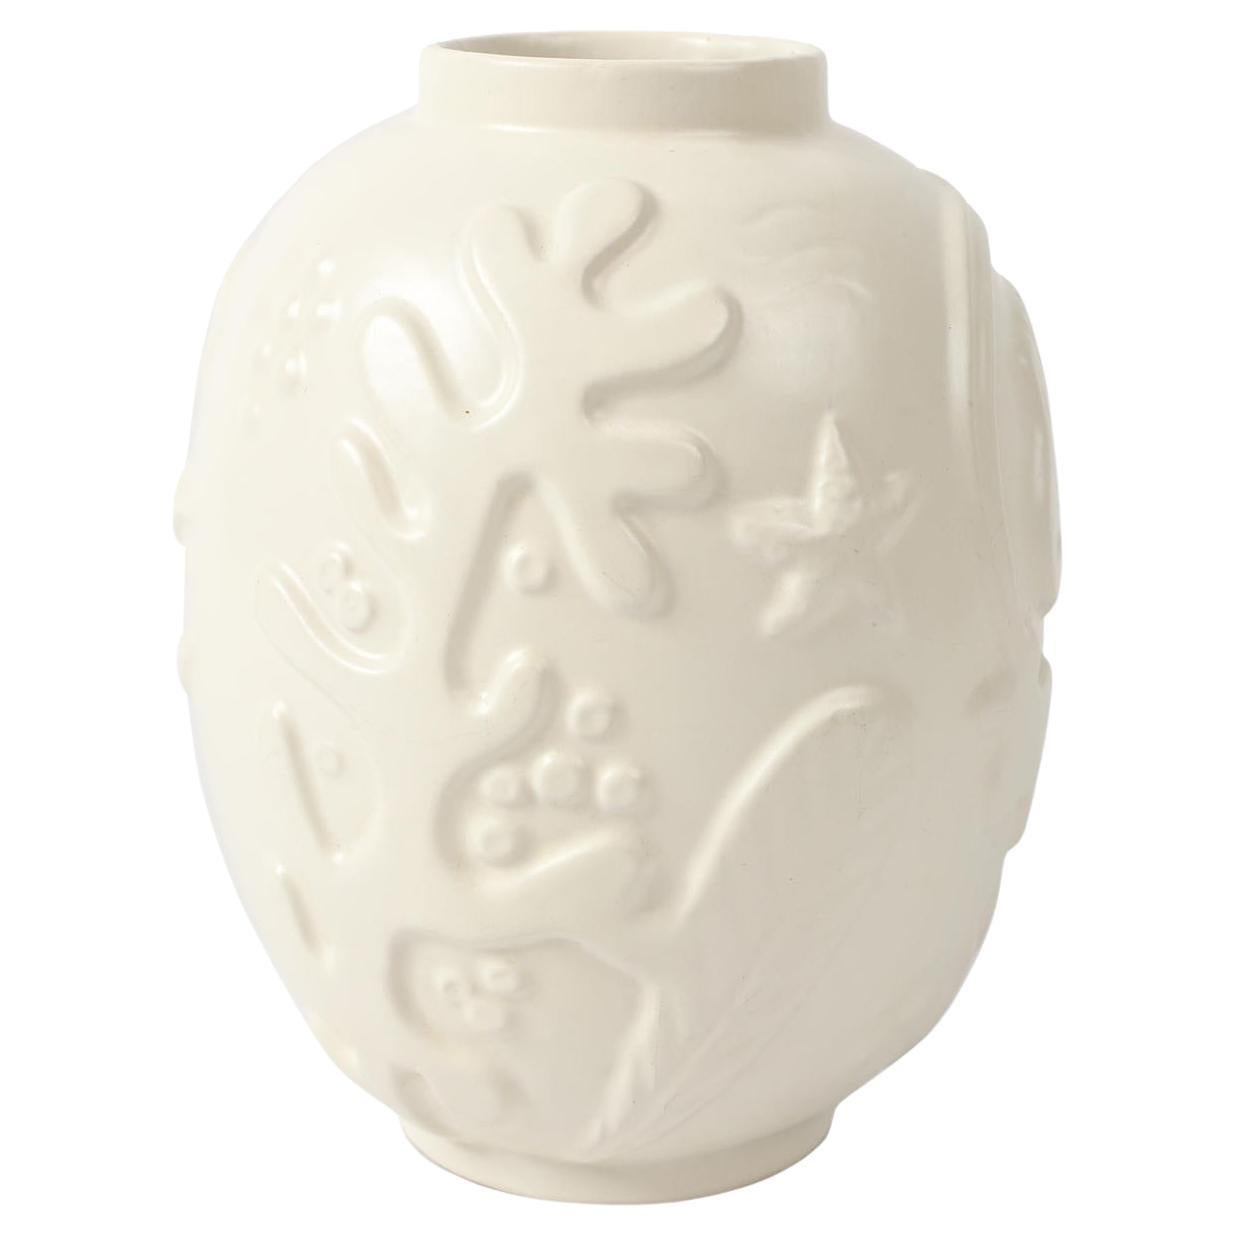 Timeless Elegance: Anna-Lisa Thomson's Iconic Earthenware Vase from the 1930s. For Sale